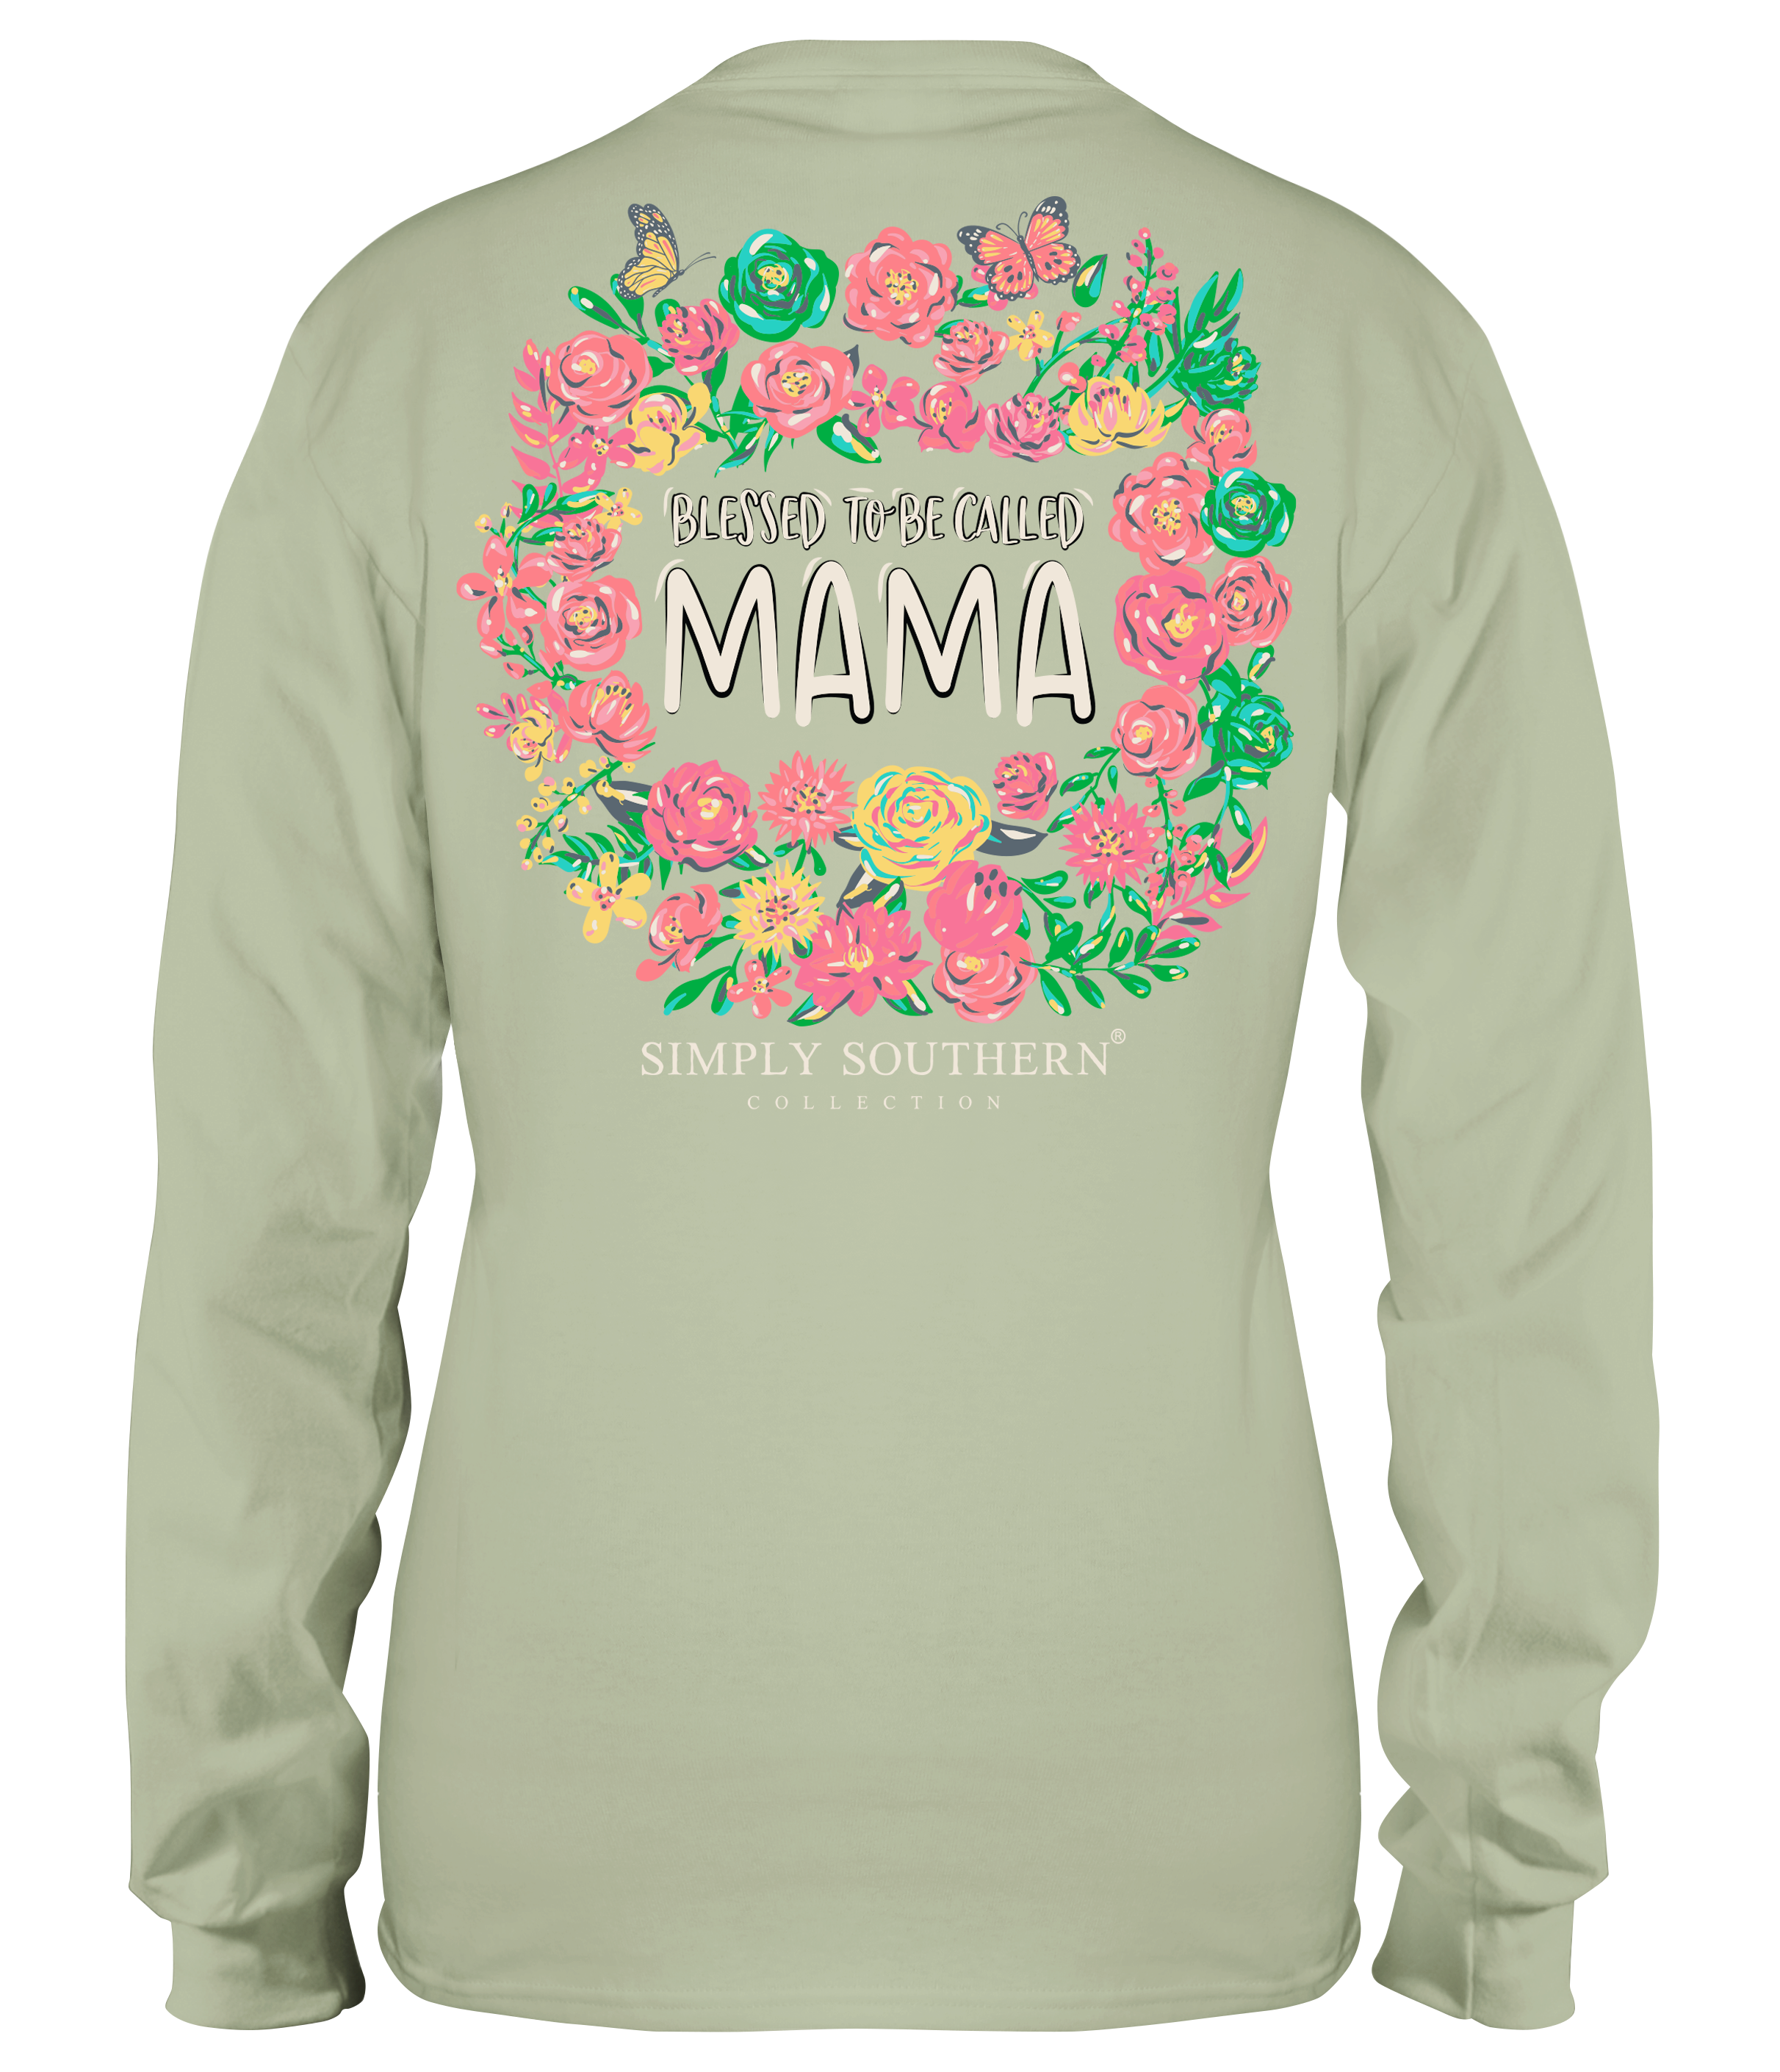 'Blessed to be Called Mama' Floral Long Sleeve Tee by Simply Southern